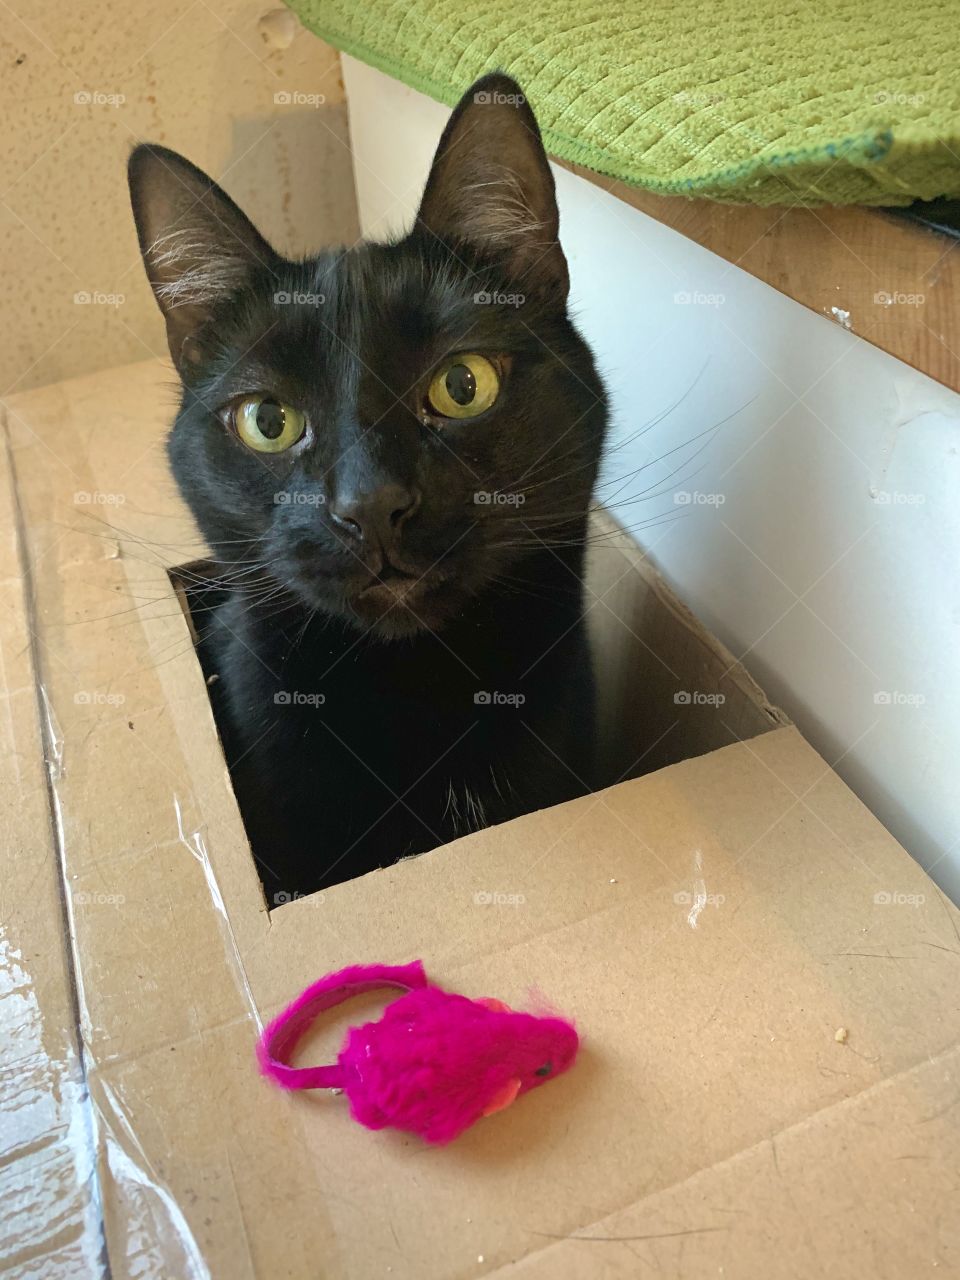 Black cat in cardboard box playing with toy mouse